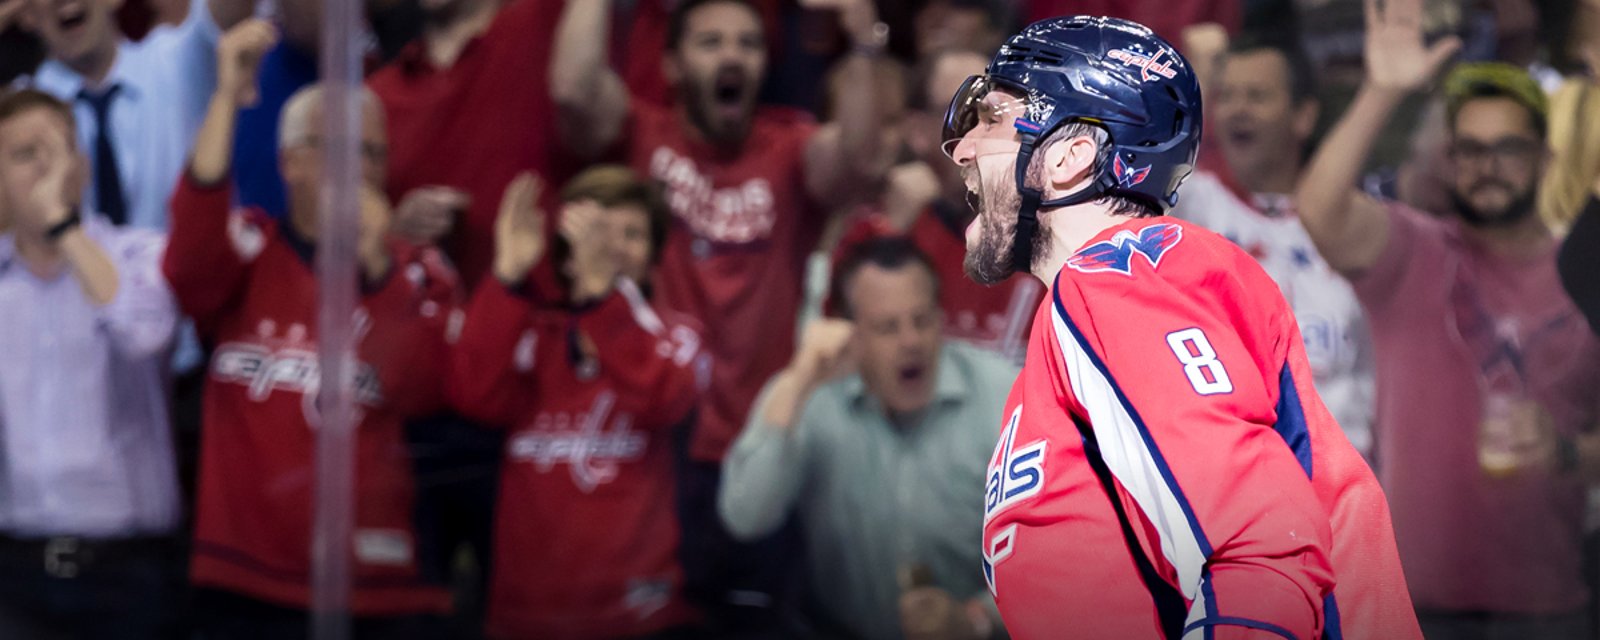 Ovechkin matches an insane record